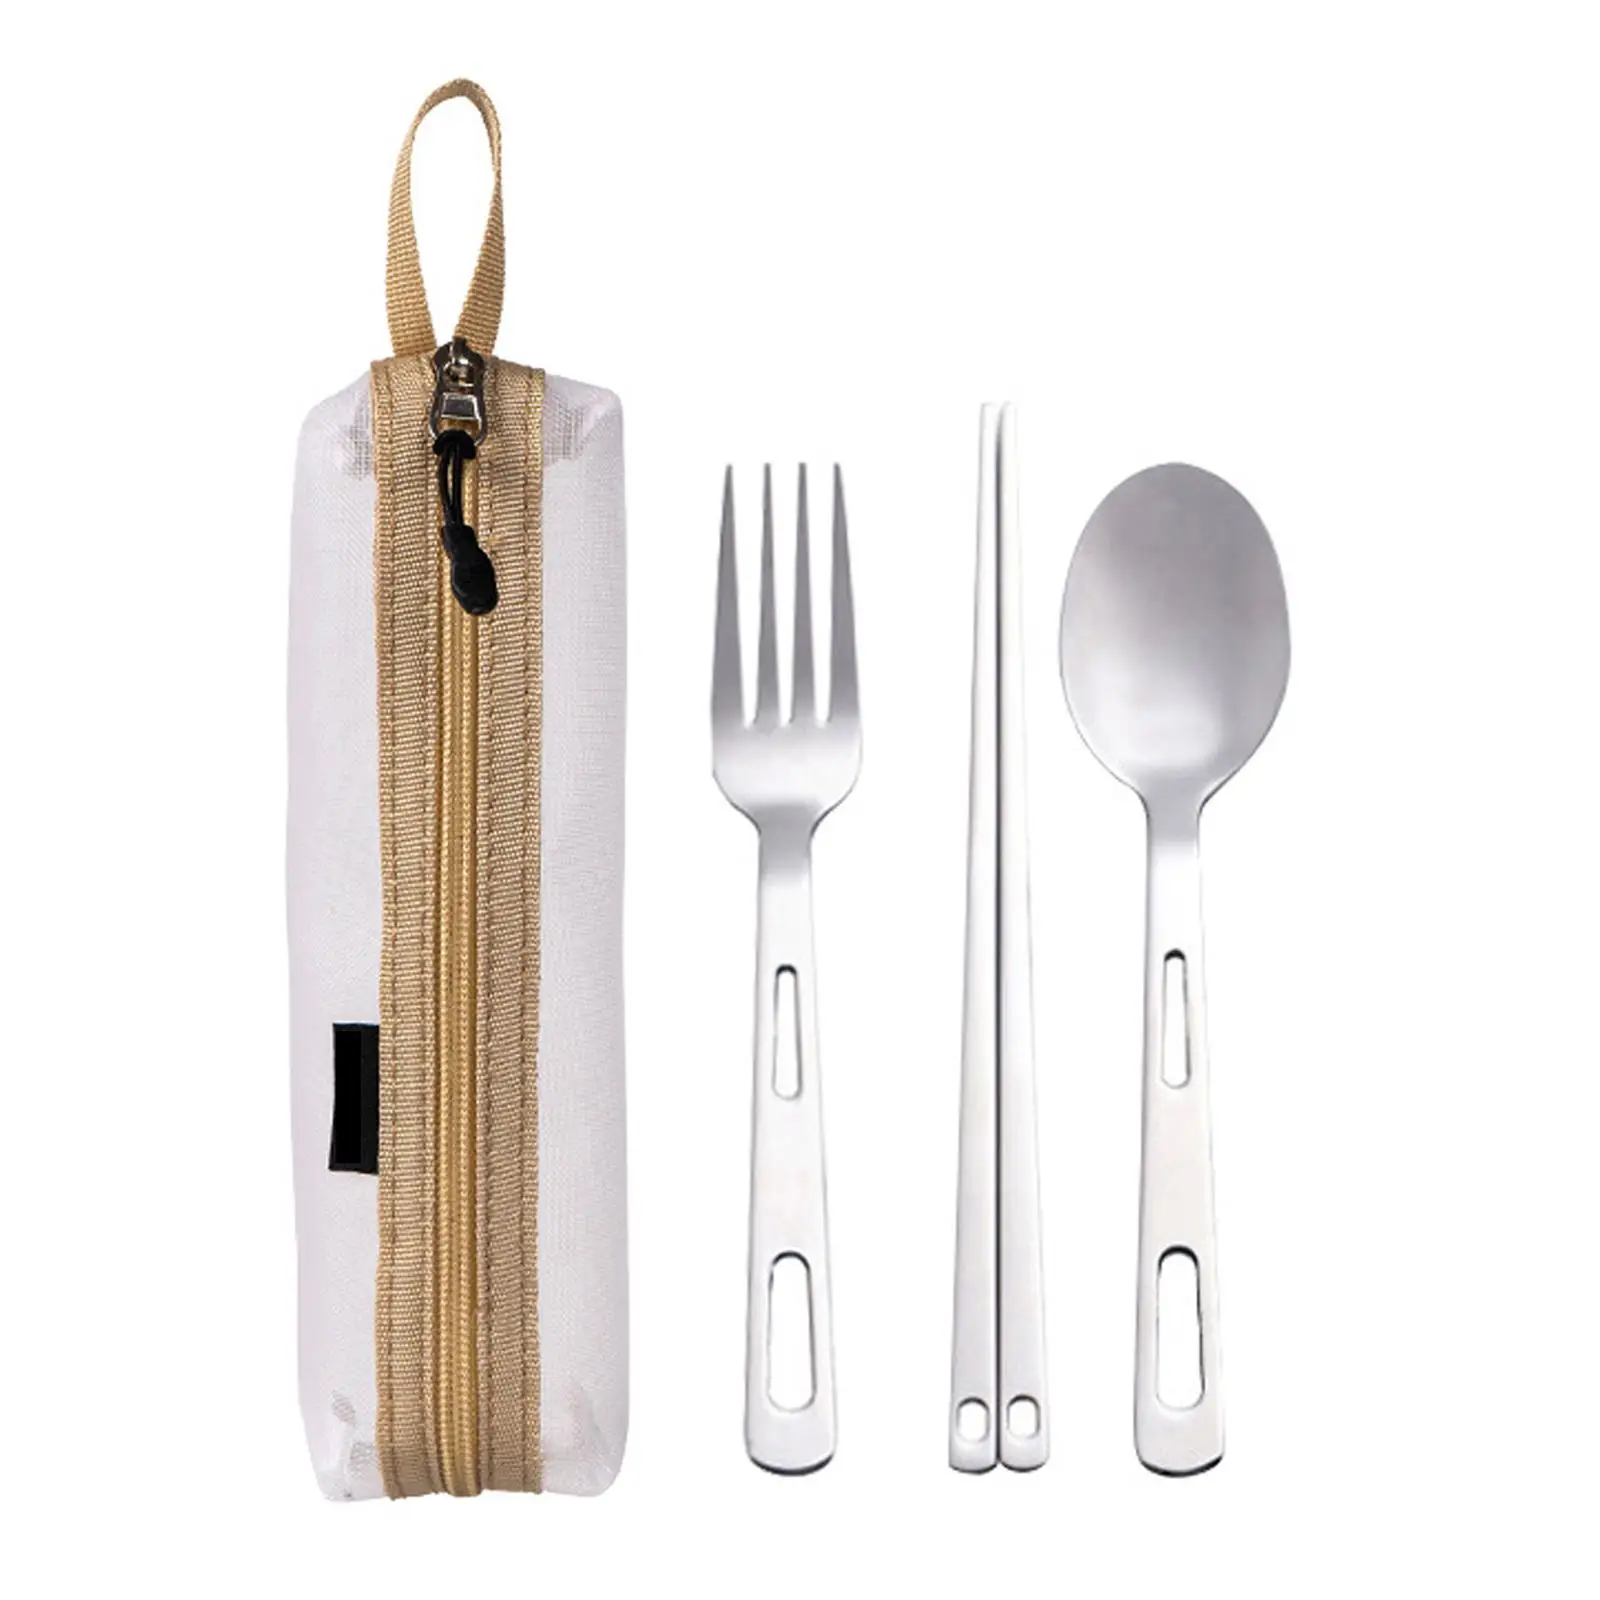 Camping Cutlery Set Camping Utensils Tableware Portable Reusable Outdoor